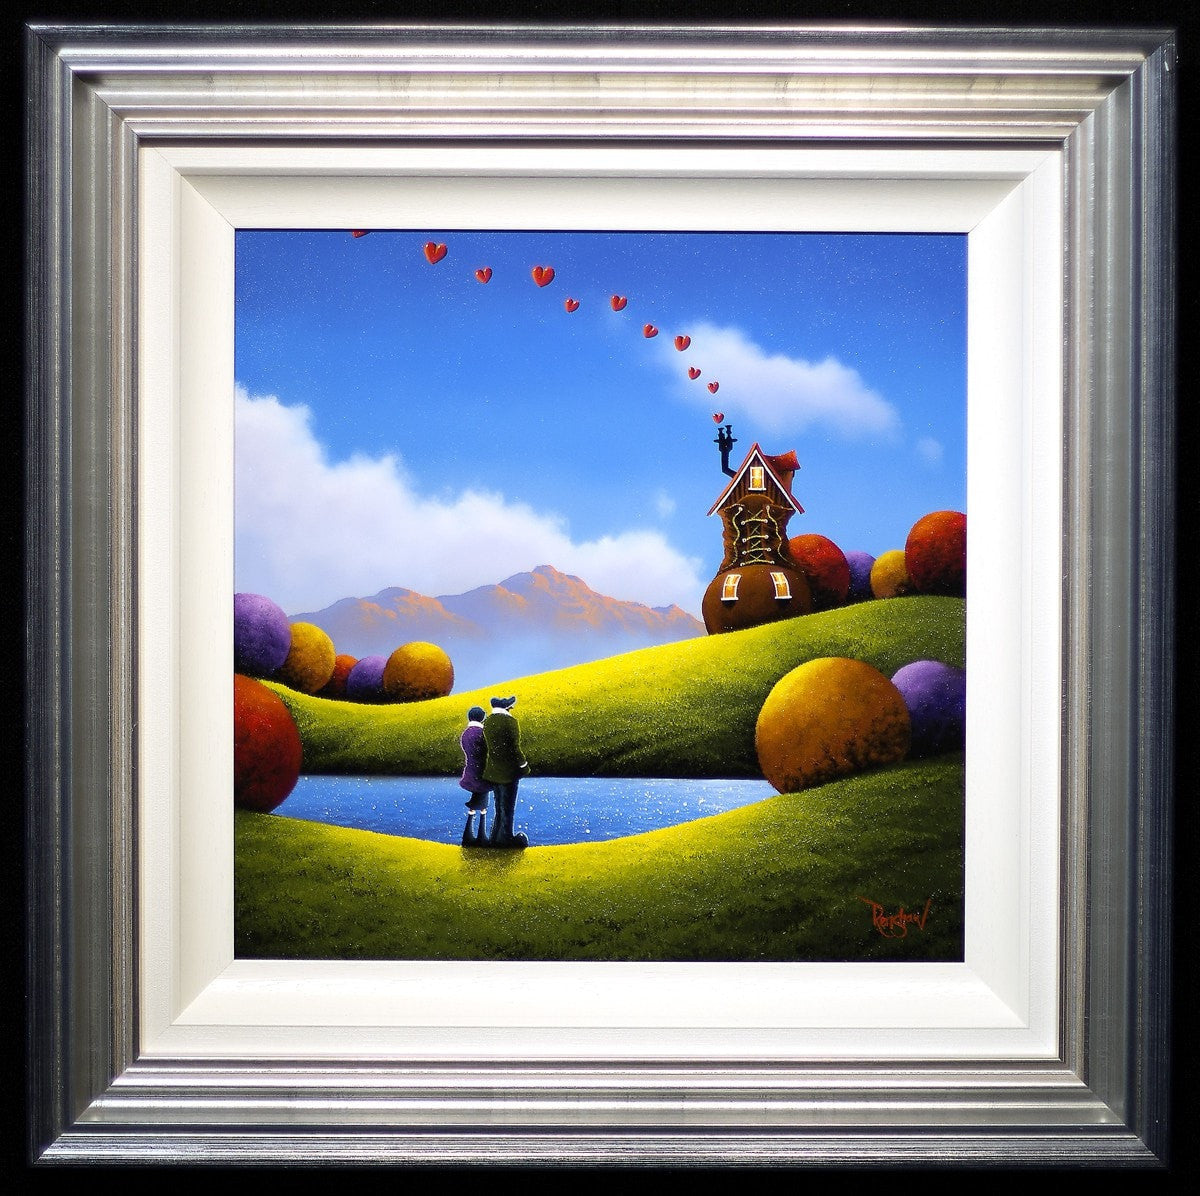 Welcome Home - SOLD David Renshaw